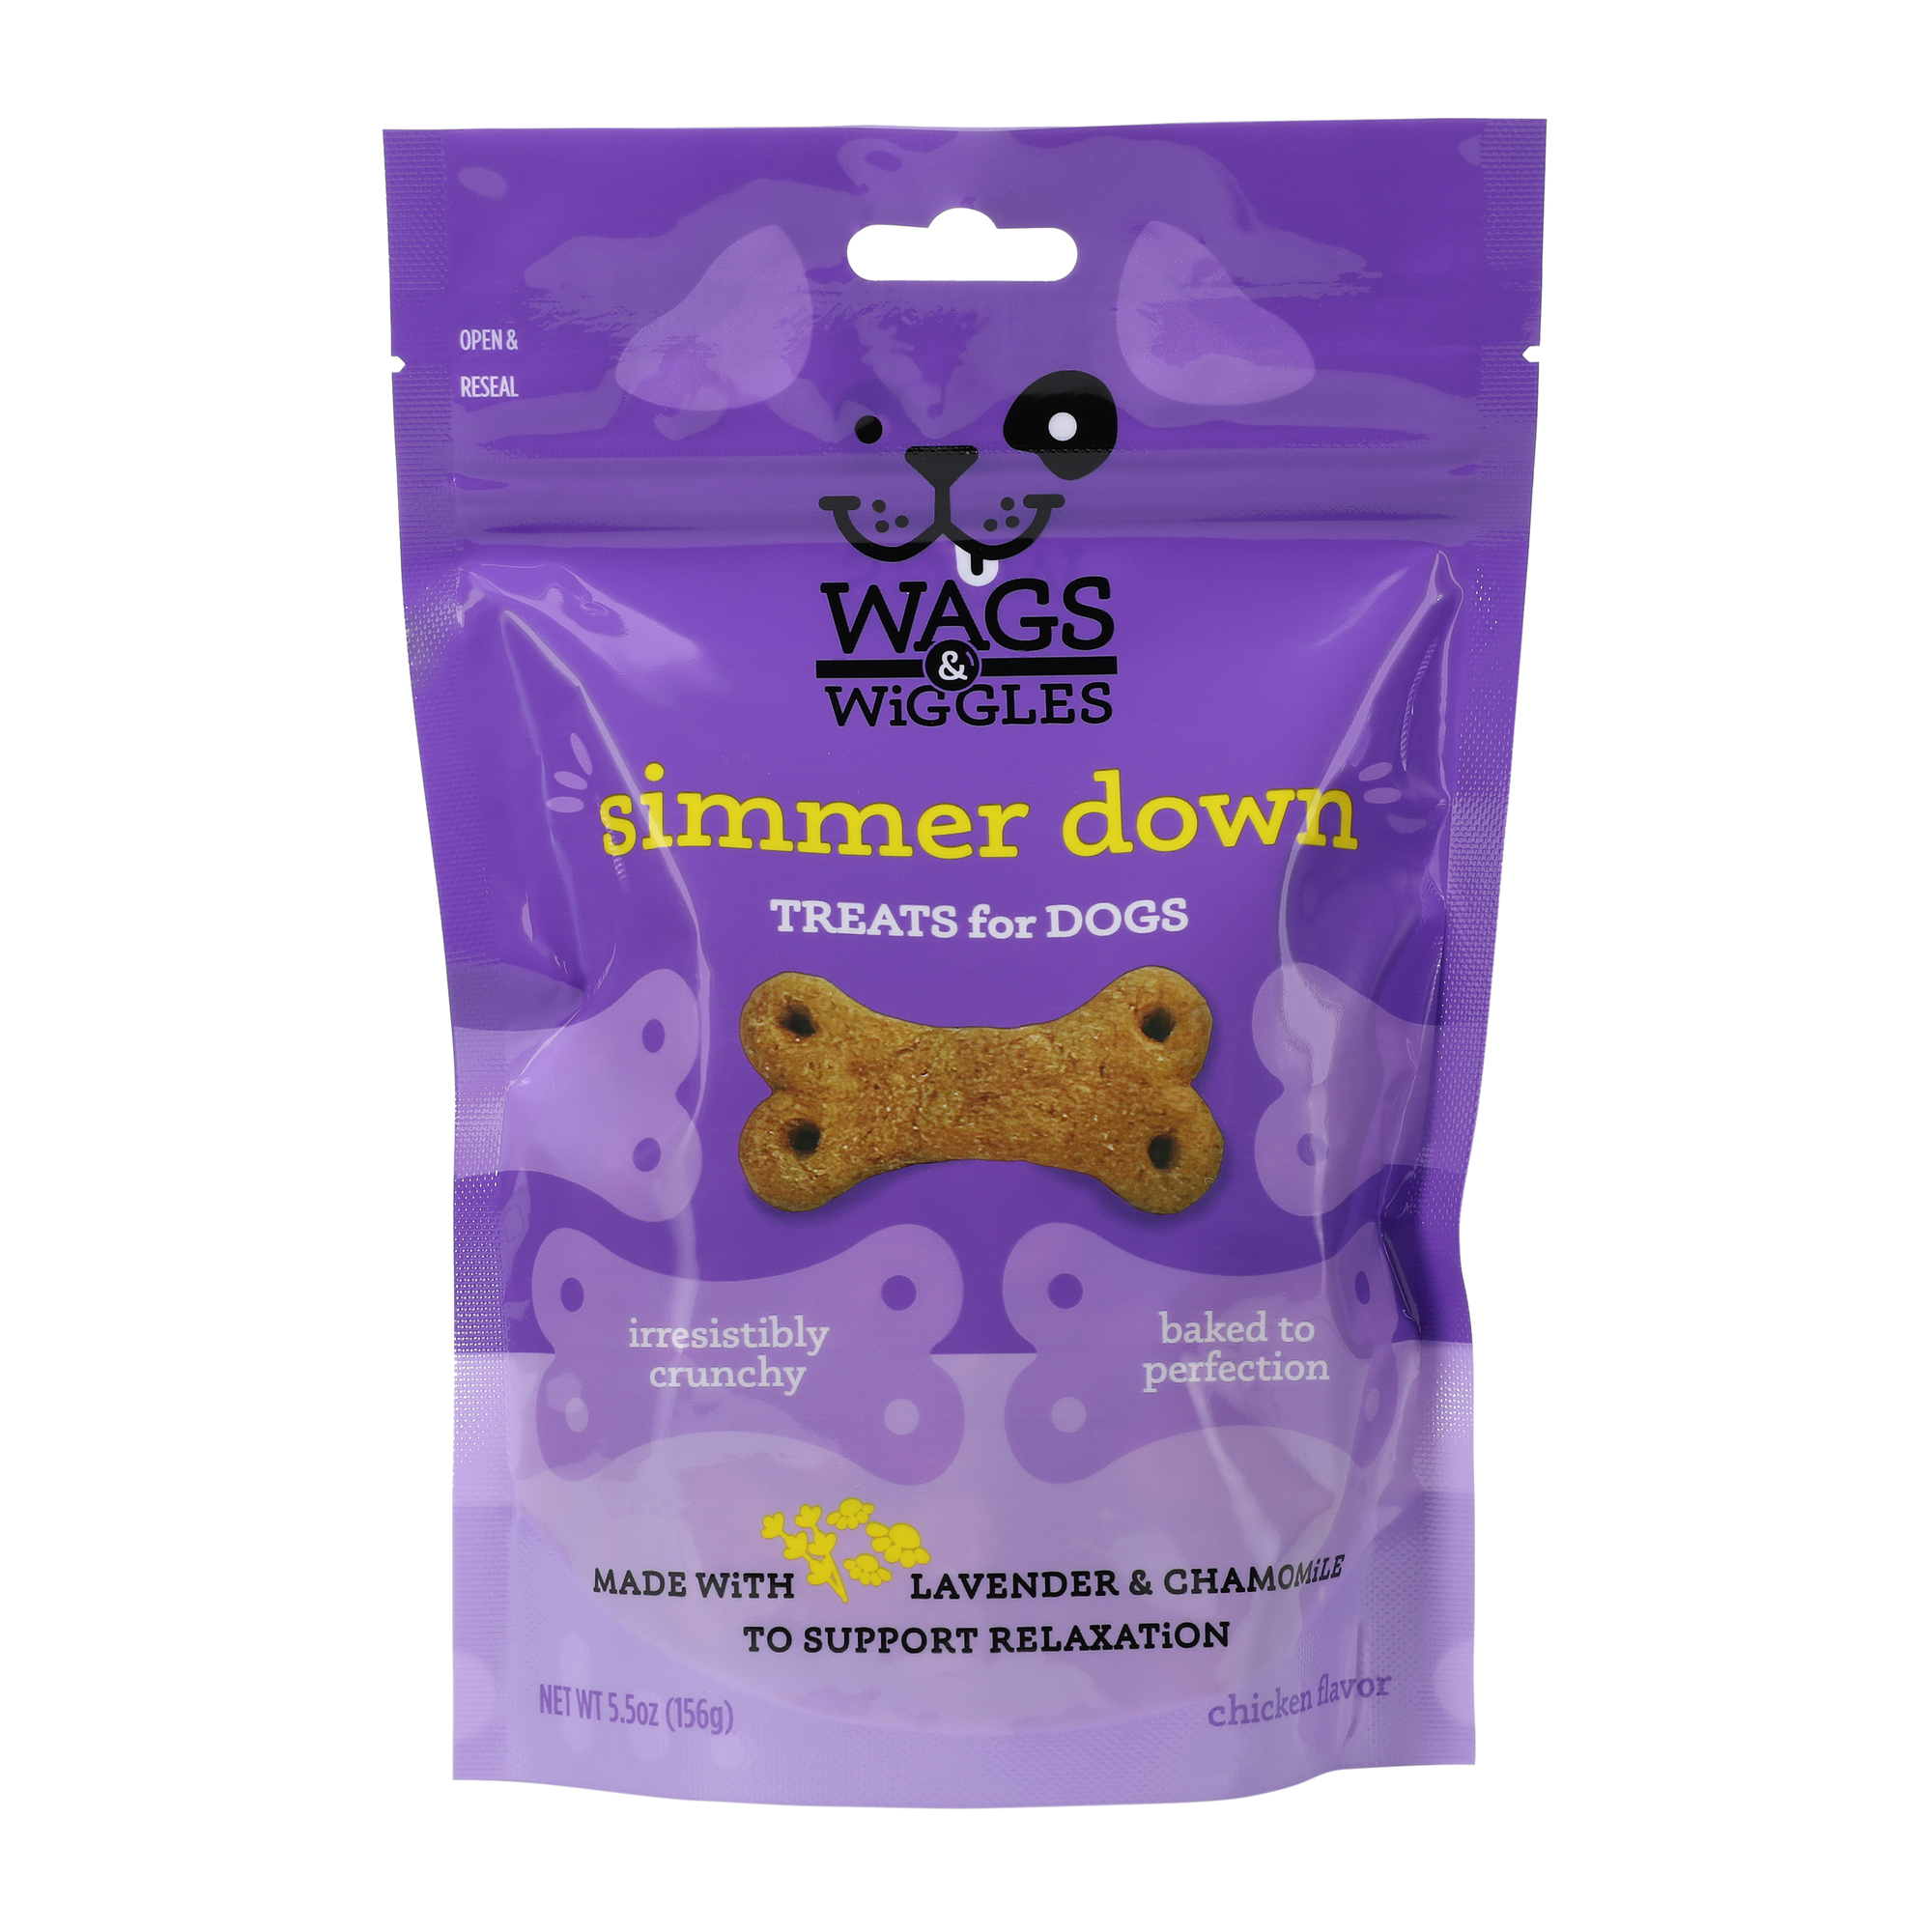 wags & wiggles gentle belly treats for dogs 5.5oz